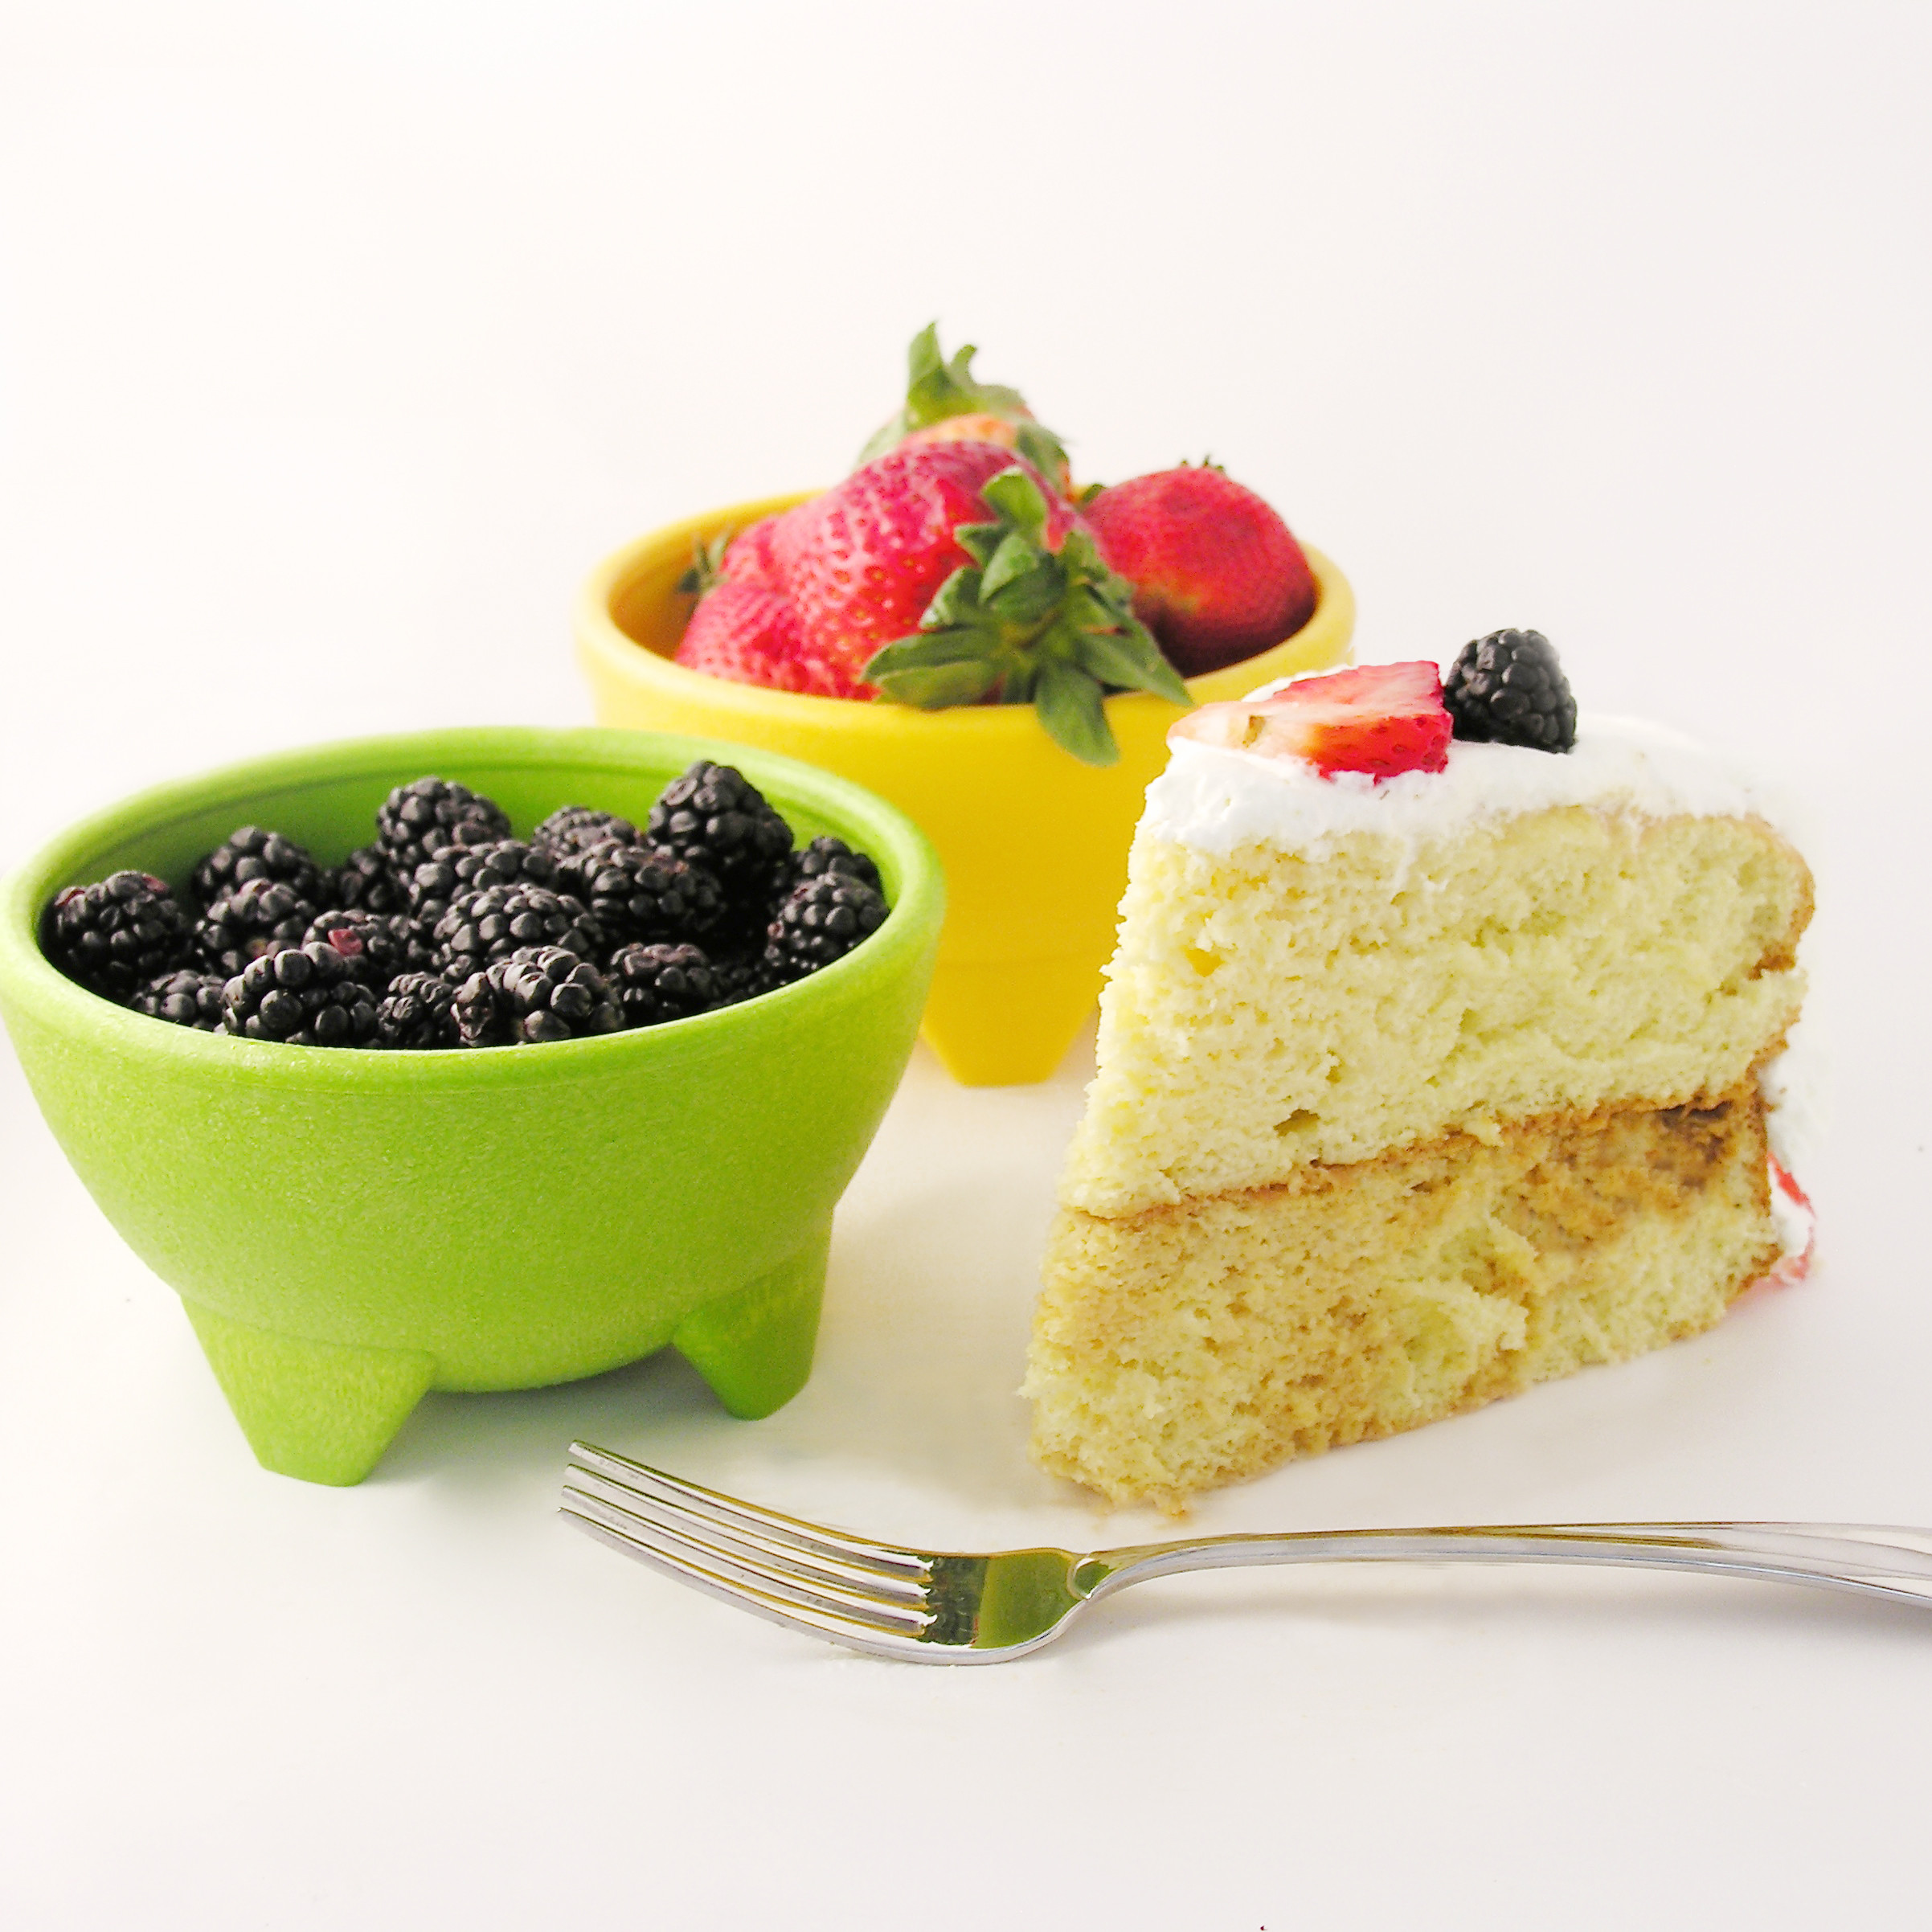 Authentic Tres Leches Cake Recipe With Fruit
 Tres Leches Cake